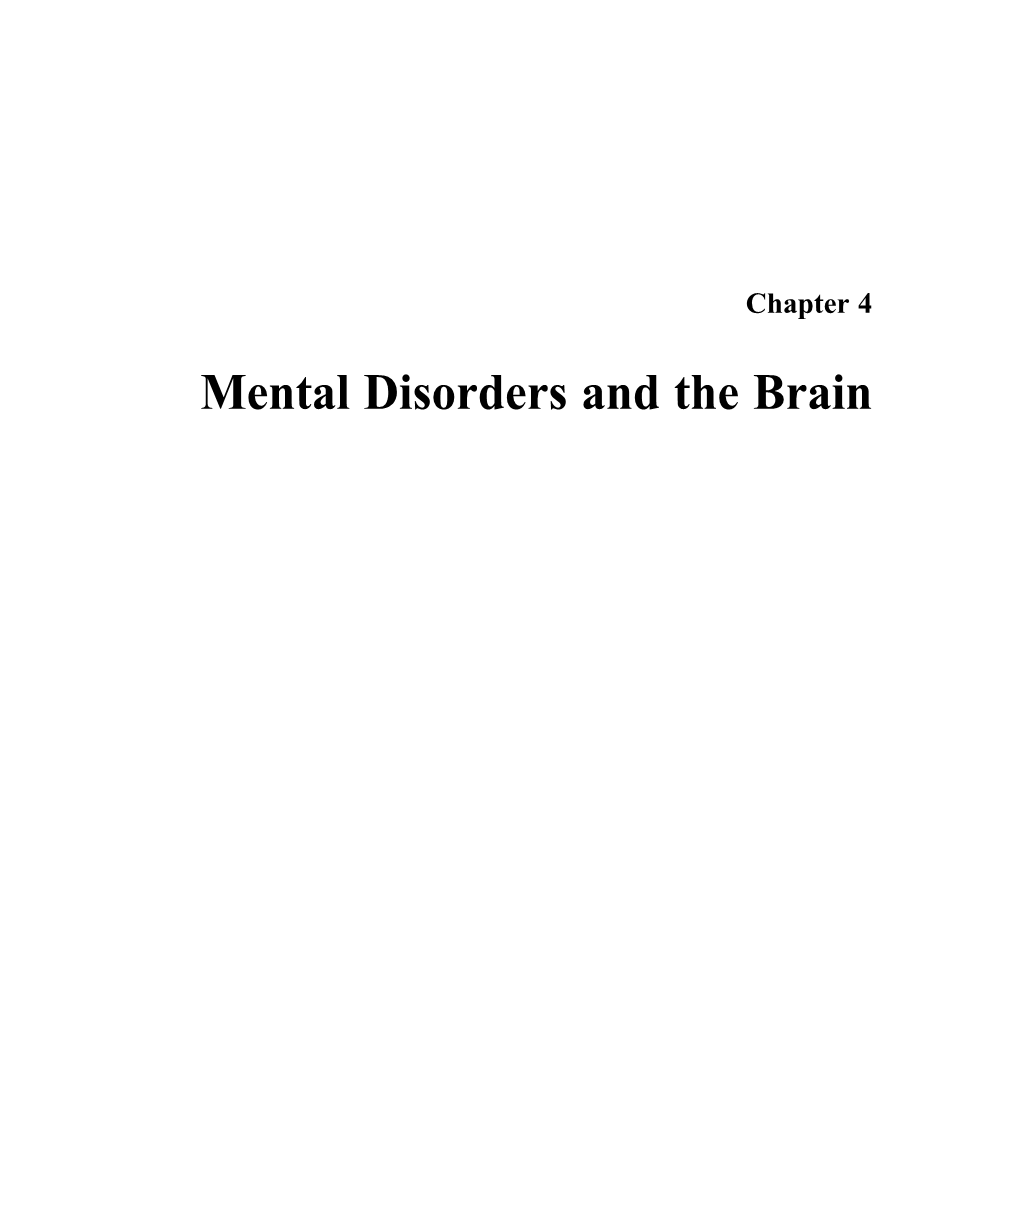 Mental Disorders and the Brain CONTENTS Page METHODS USED to STUDY MENTAL DISORDERS